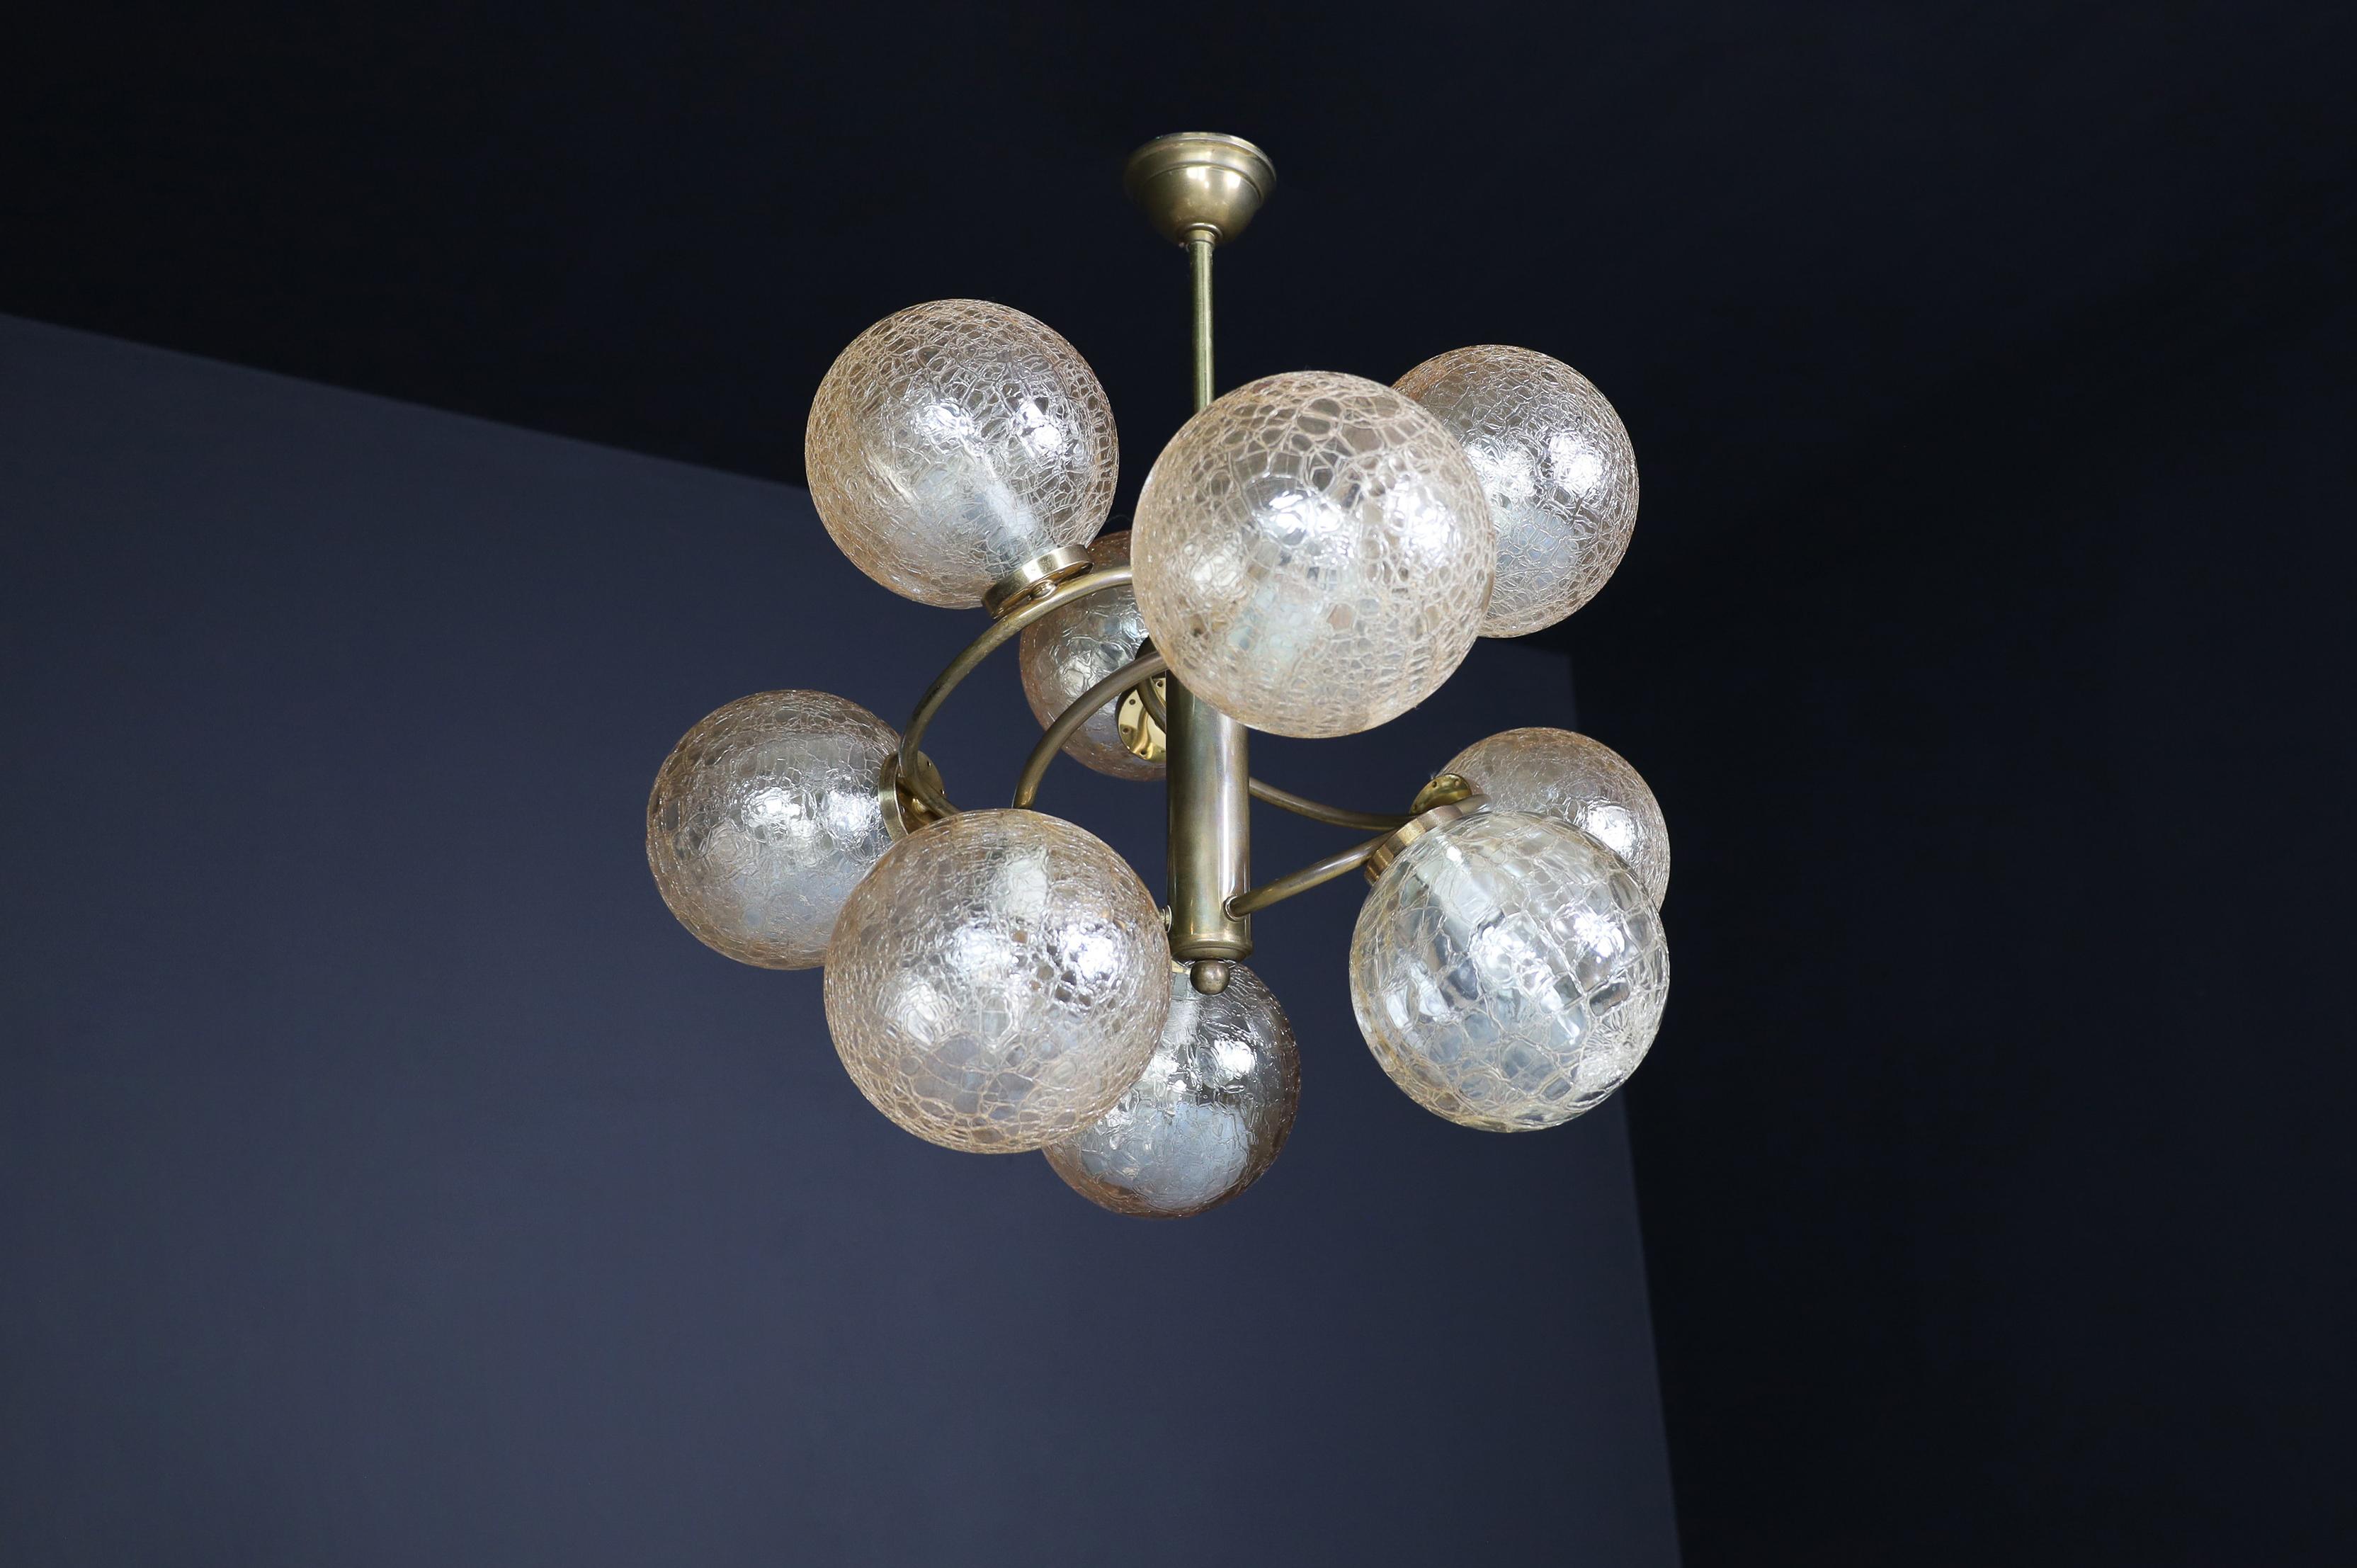 Patinated Brass Chandelier Wit Nine Amber-Colored Globes, Germany 1960s For Sale 4